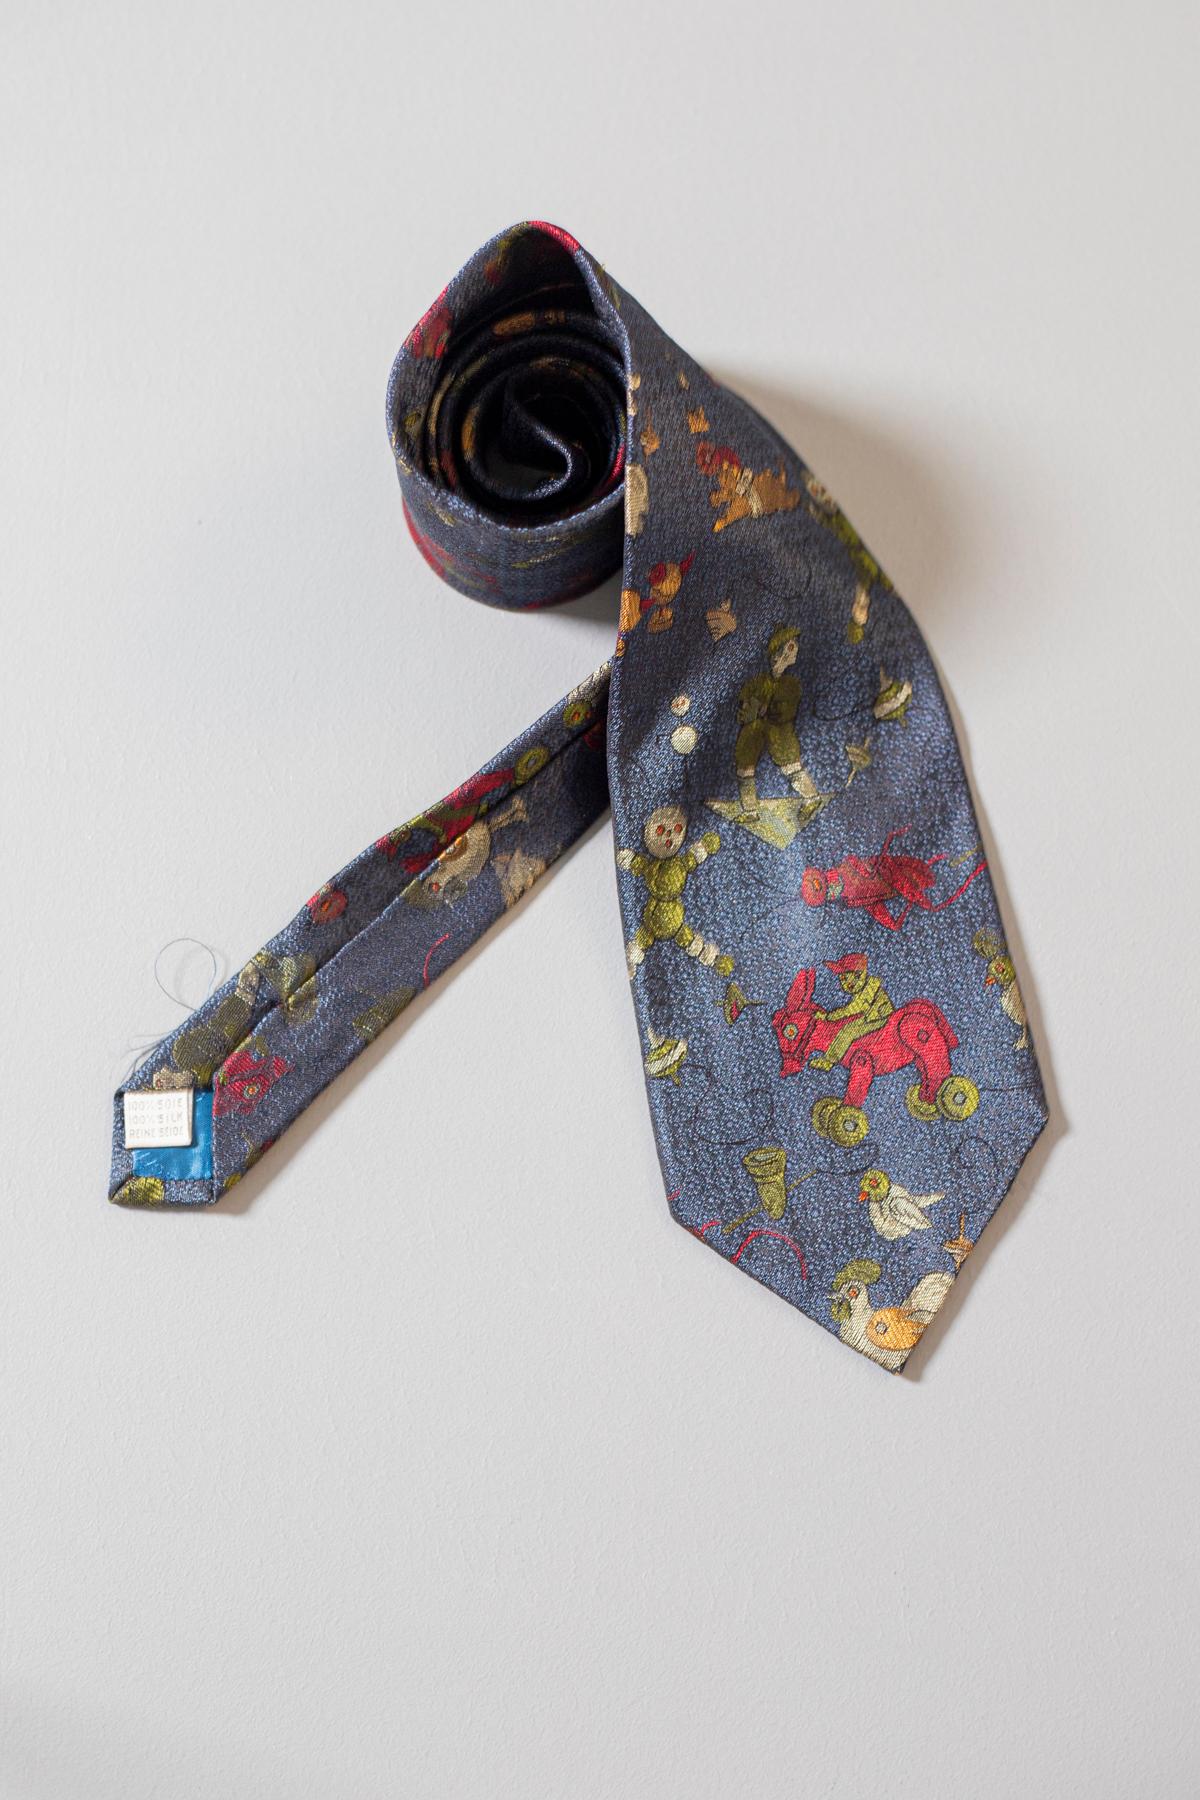 This Moschino all-silk tie is very special: on a dark blue background are embroidered different figures that look like animals and toys. You do not want to miss this tie if you are a real Moschino fan. This accessory is perfect for funny and